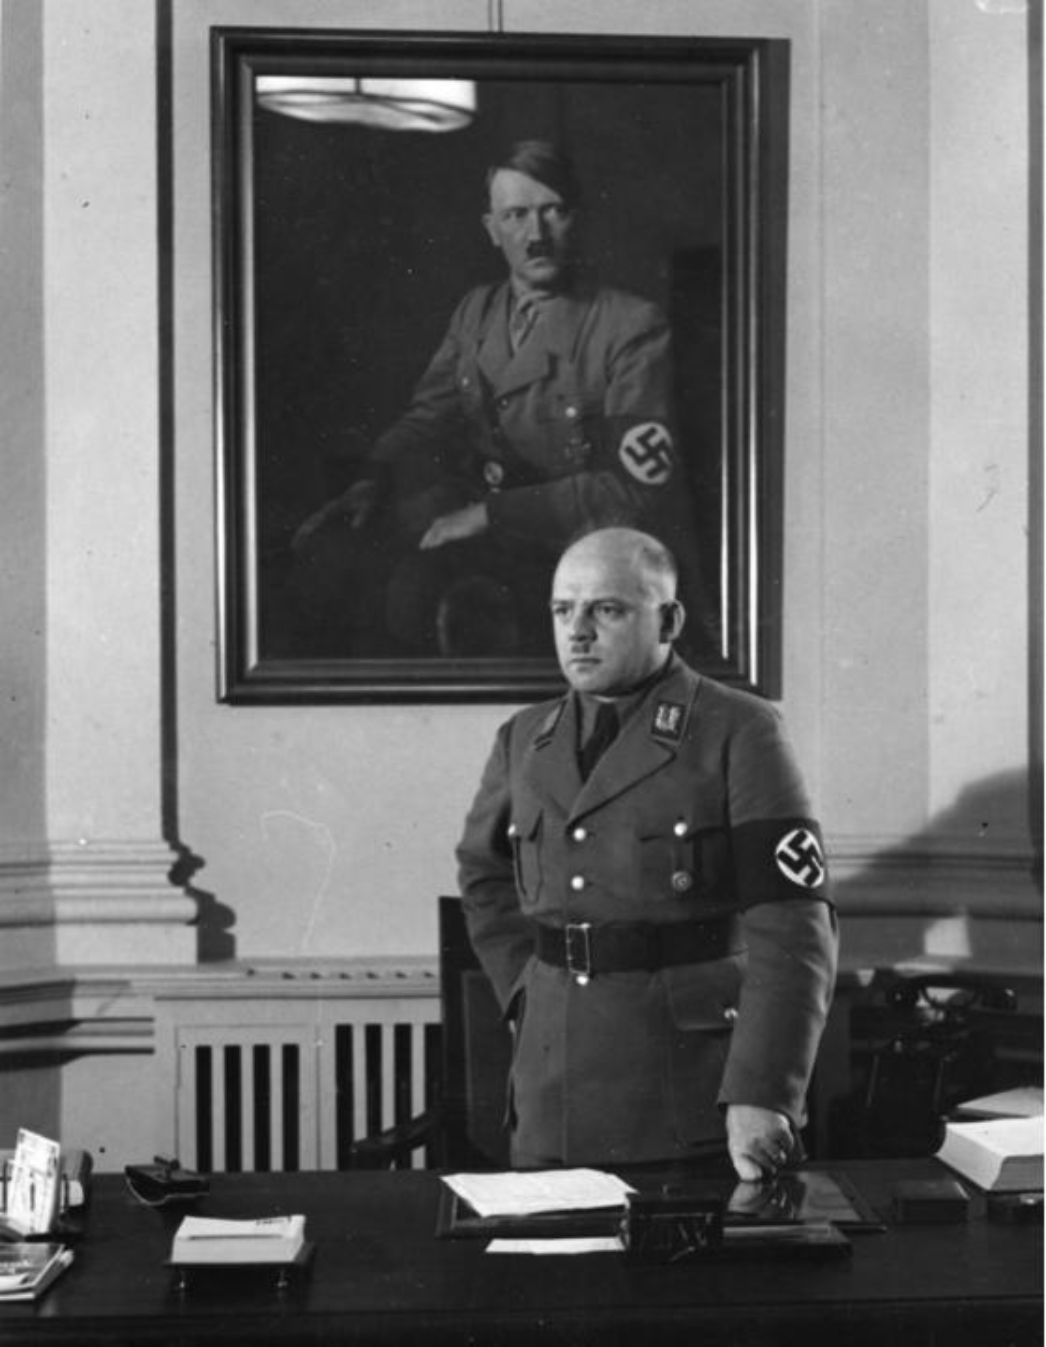 The picture shows a bald man in uniform standing behind his desk in front of a portrait of Adolf Hitler.